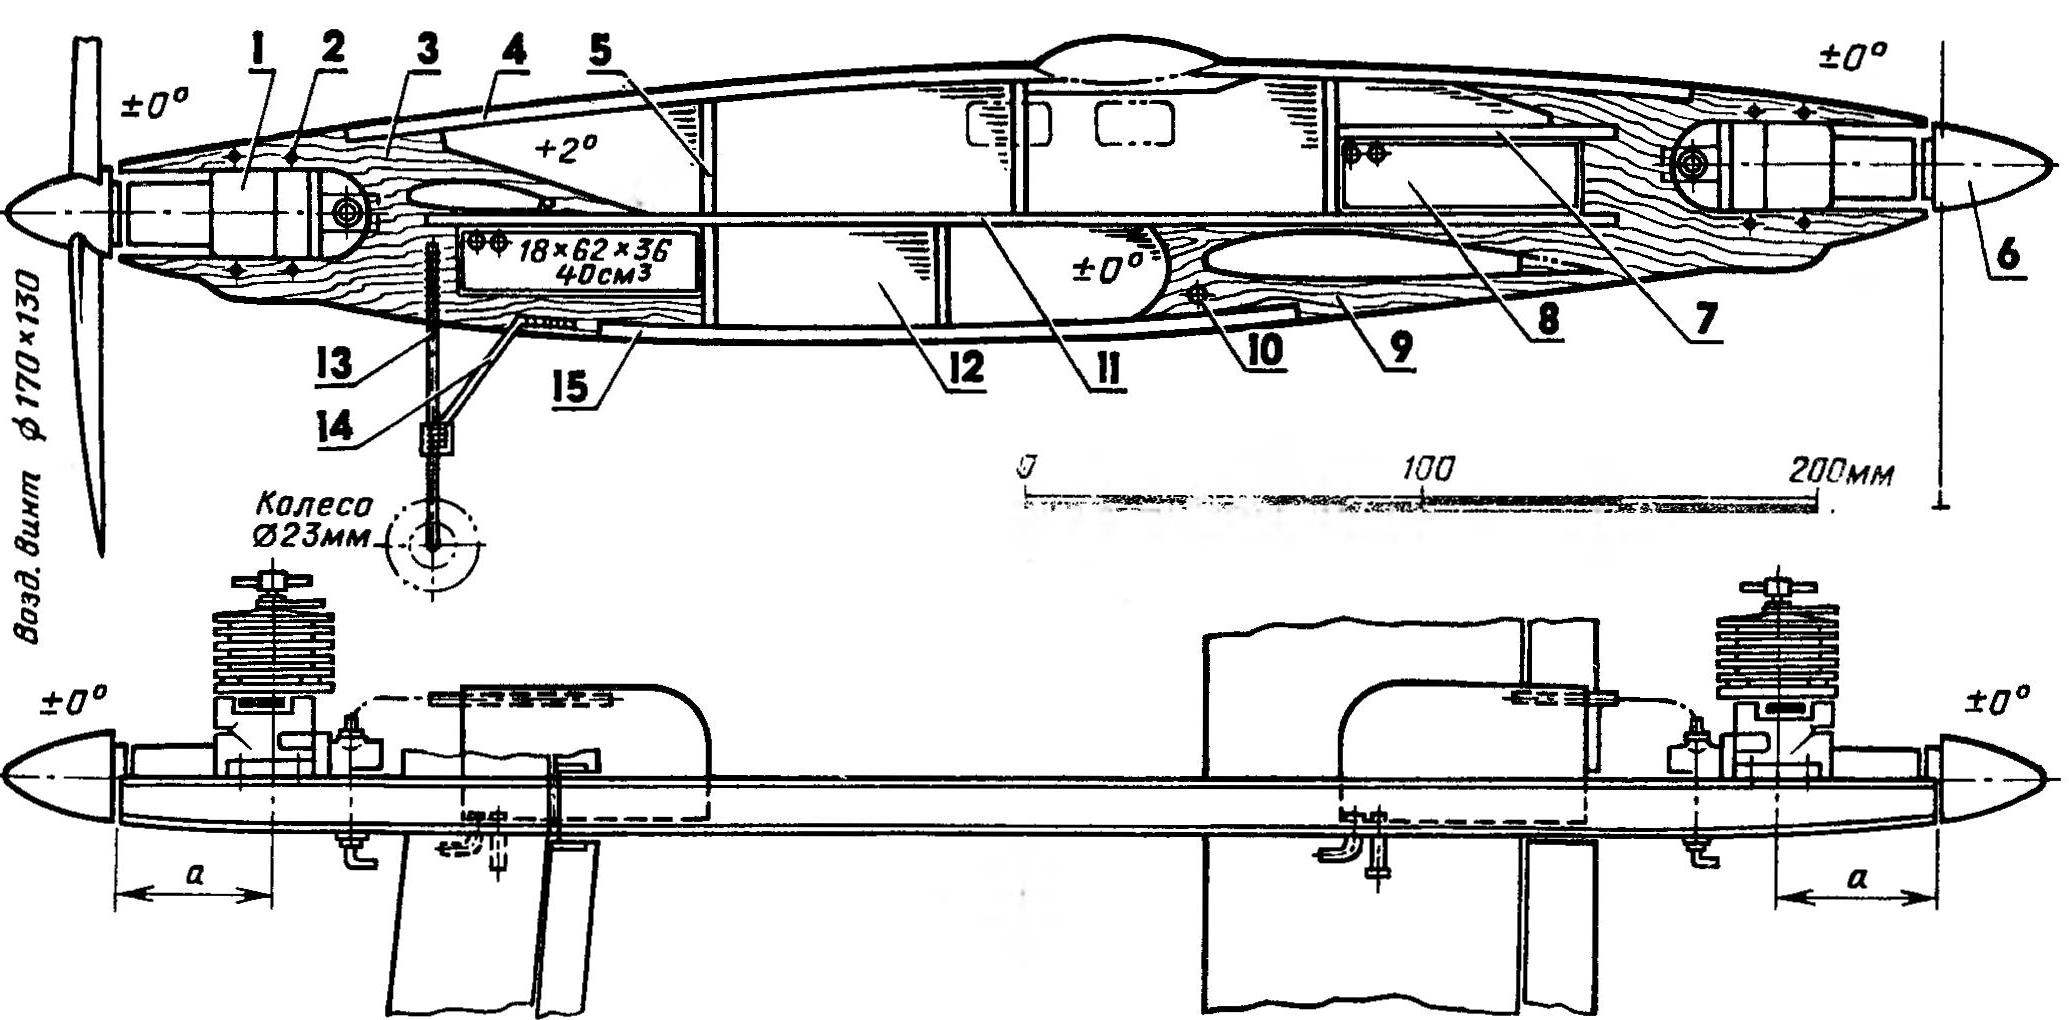 Central fuselage of the model